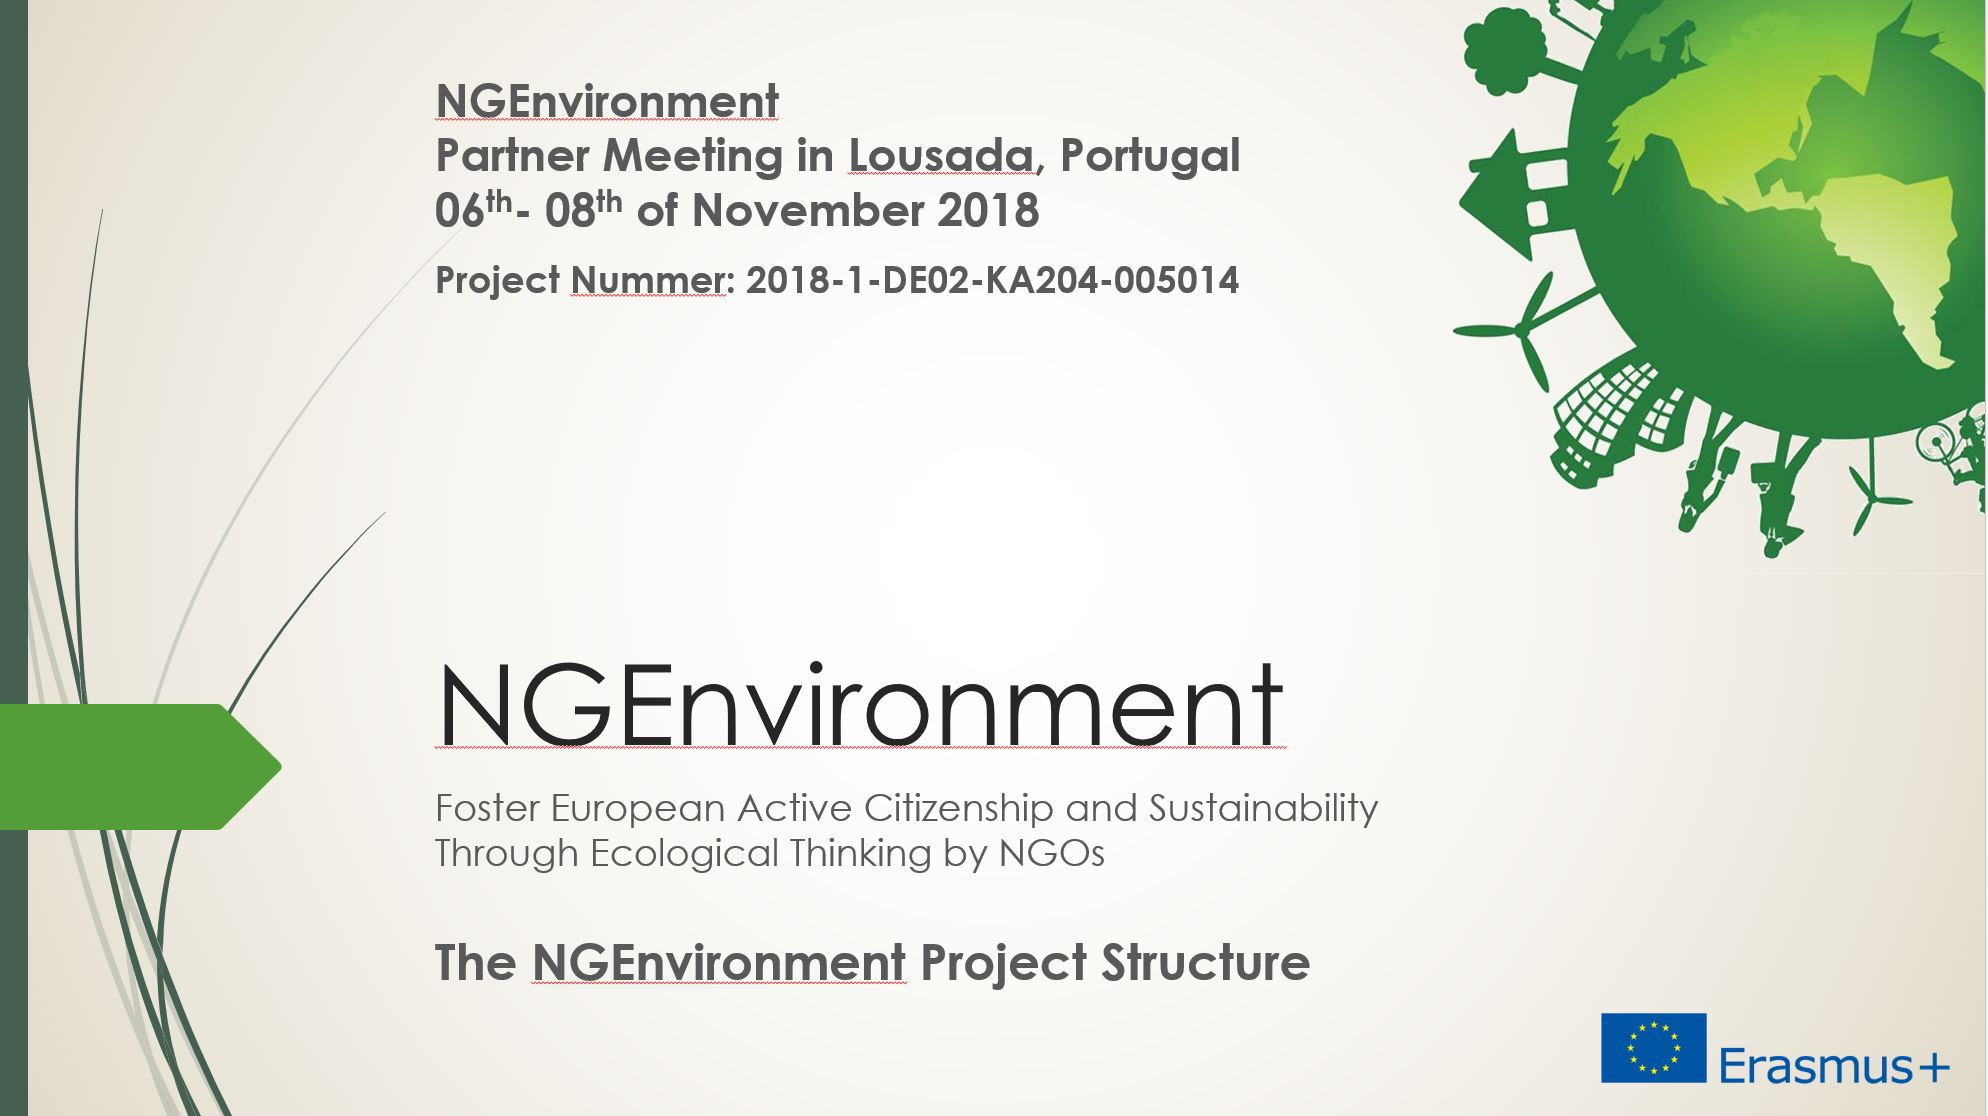 NGEnvironment - The Project